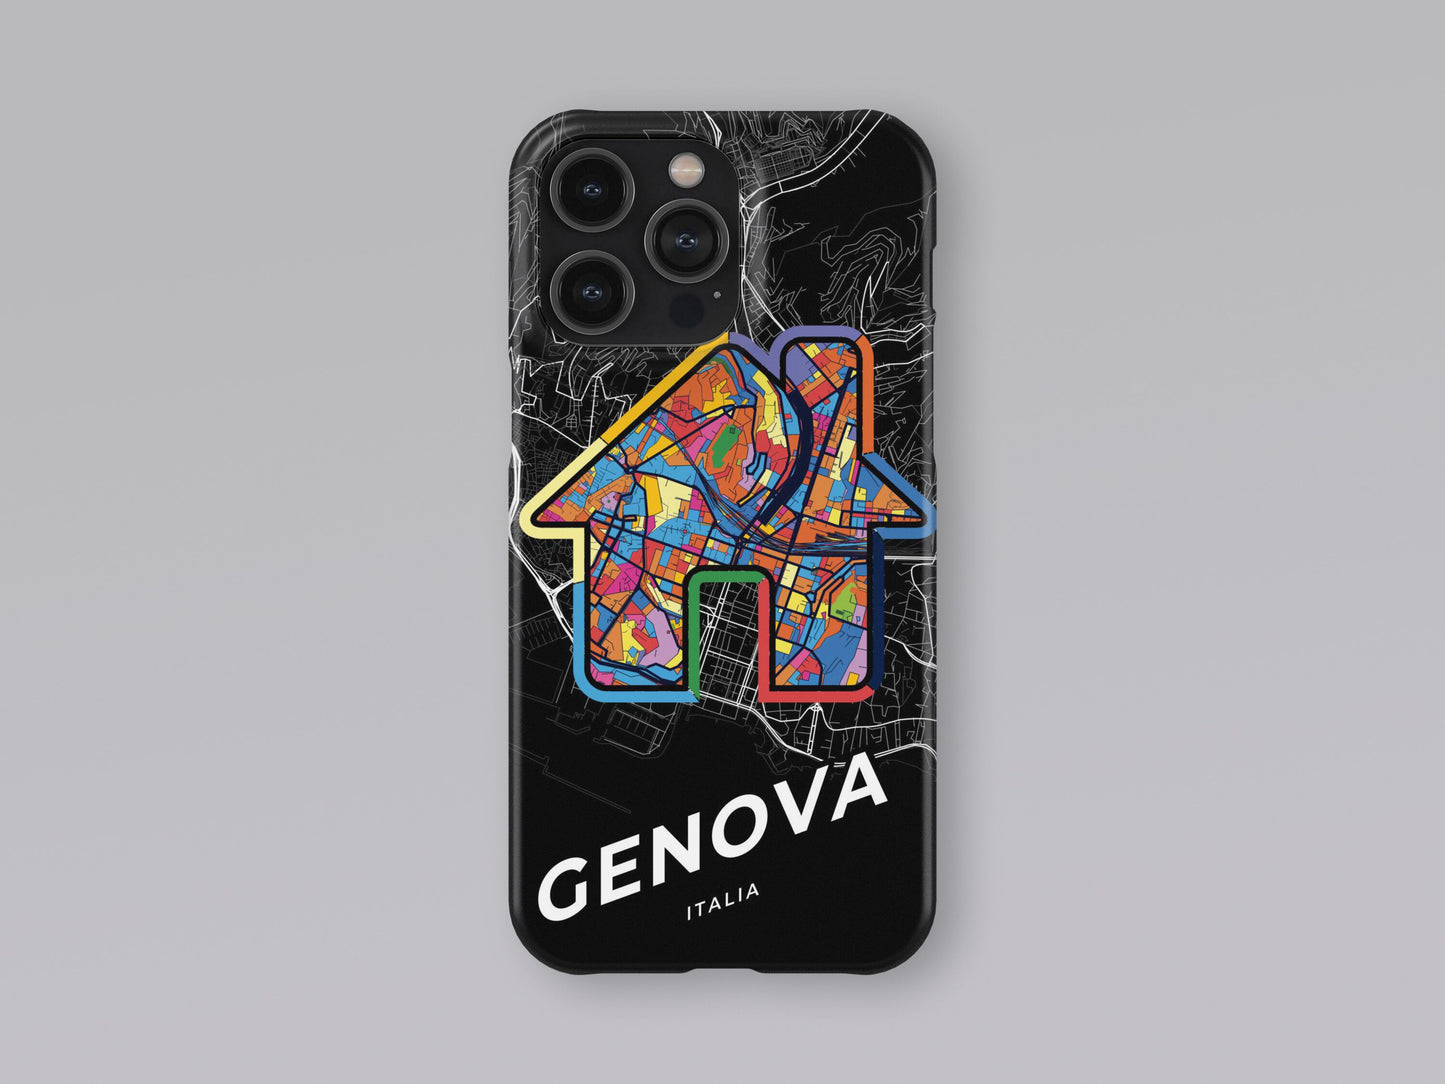 Genoa Italy slim phone case with colorful icon. Birthday, wedding or housewarming gift. Couple match cases. 3